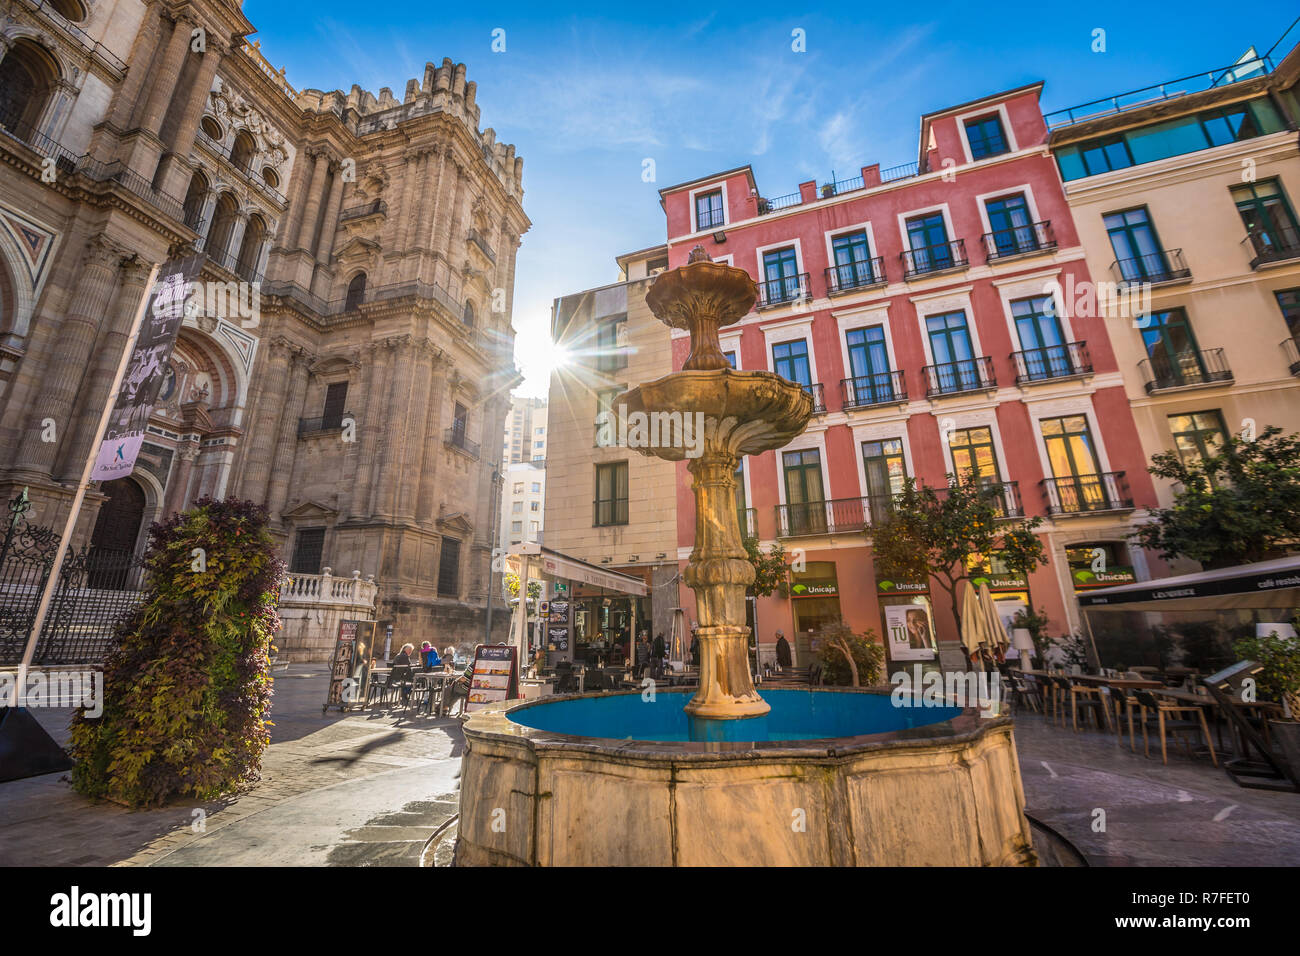 Old town square of Malaga Spain Stock Photo - Alamy